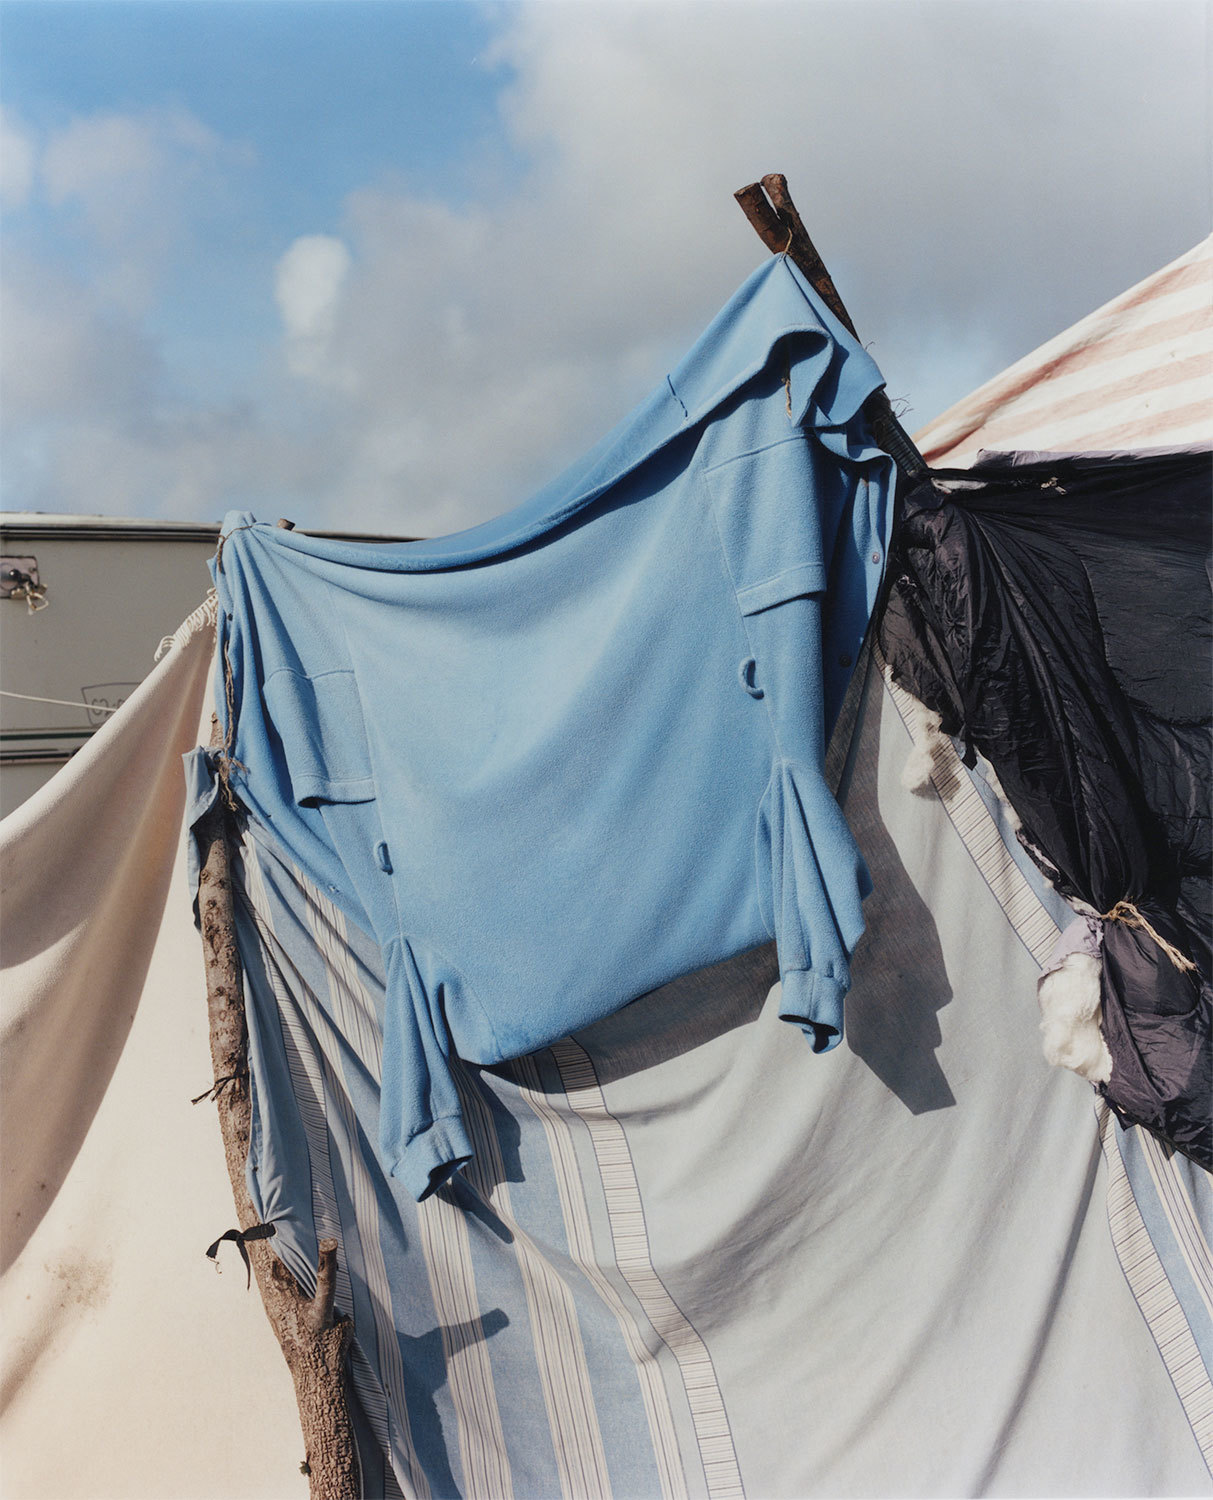 harley weir on shooting the homes and houses of the calais jungle - 'Homes'  is a new photobook by Harley Weir that documents the Calais Jungle with a  raw beauty and emotional